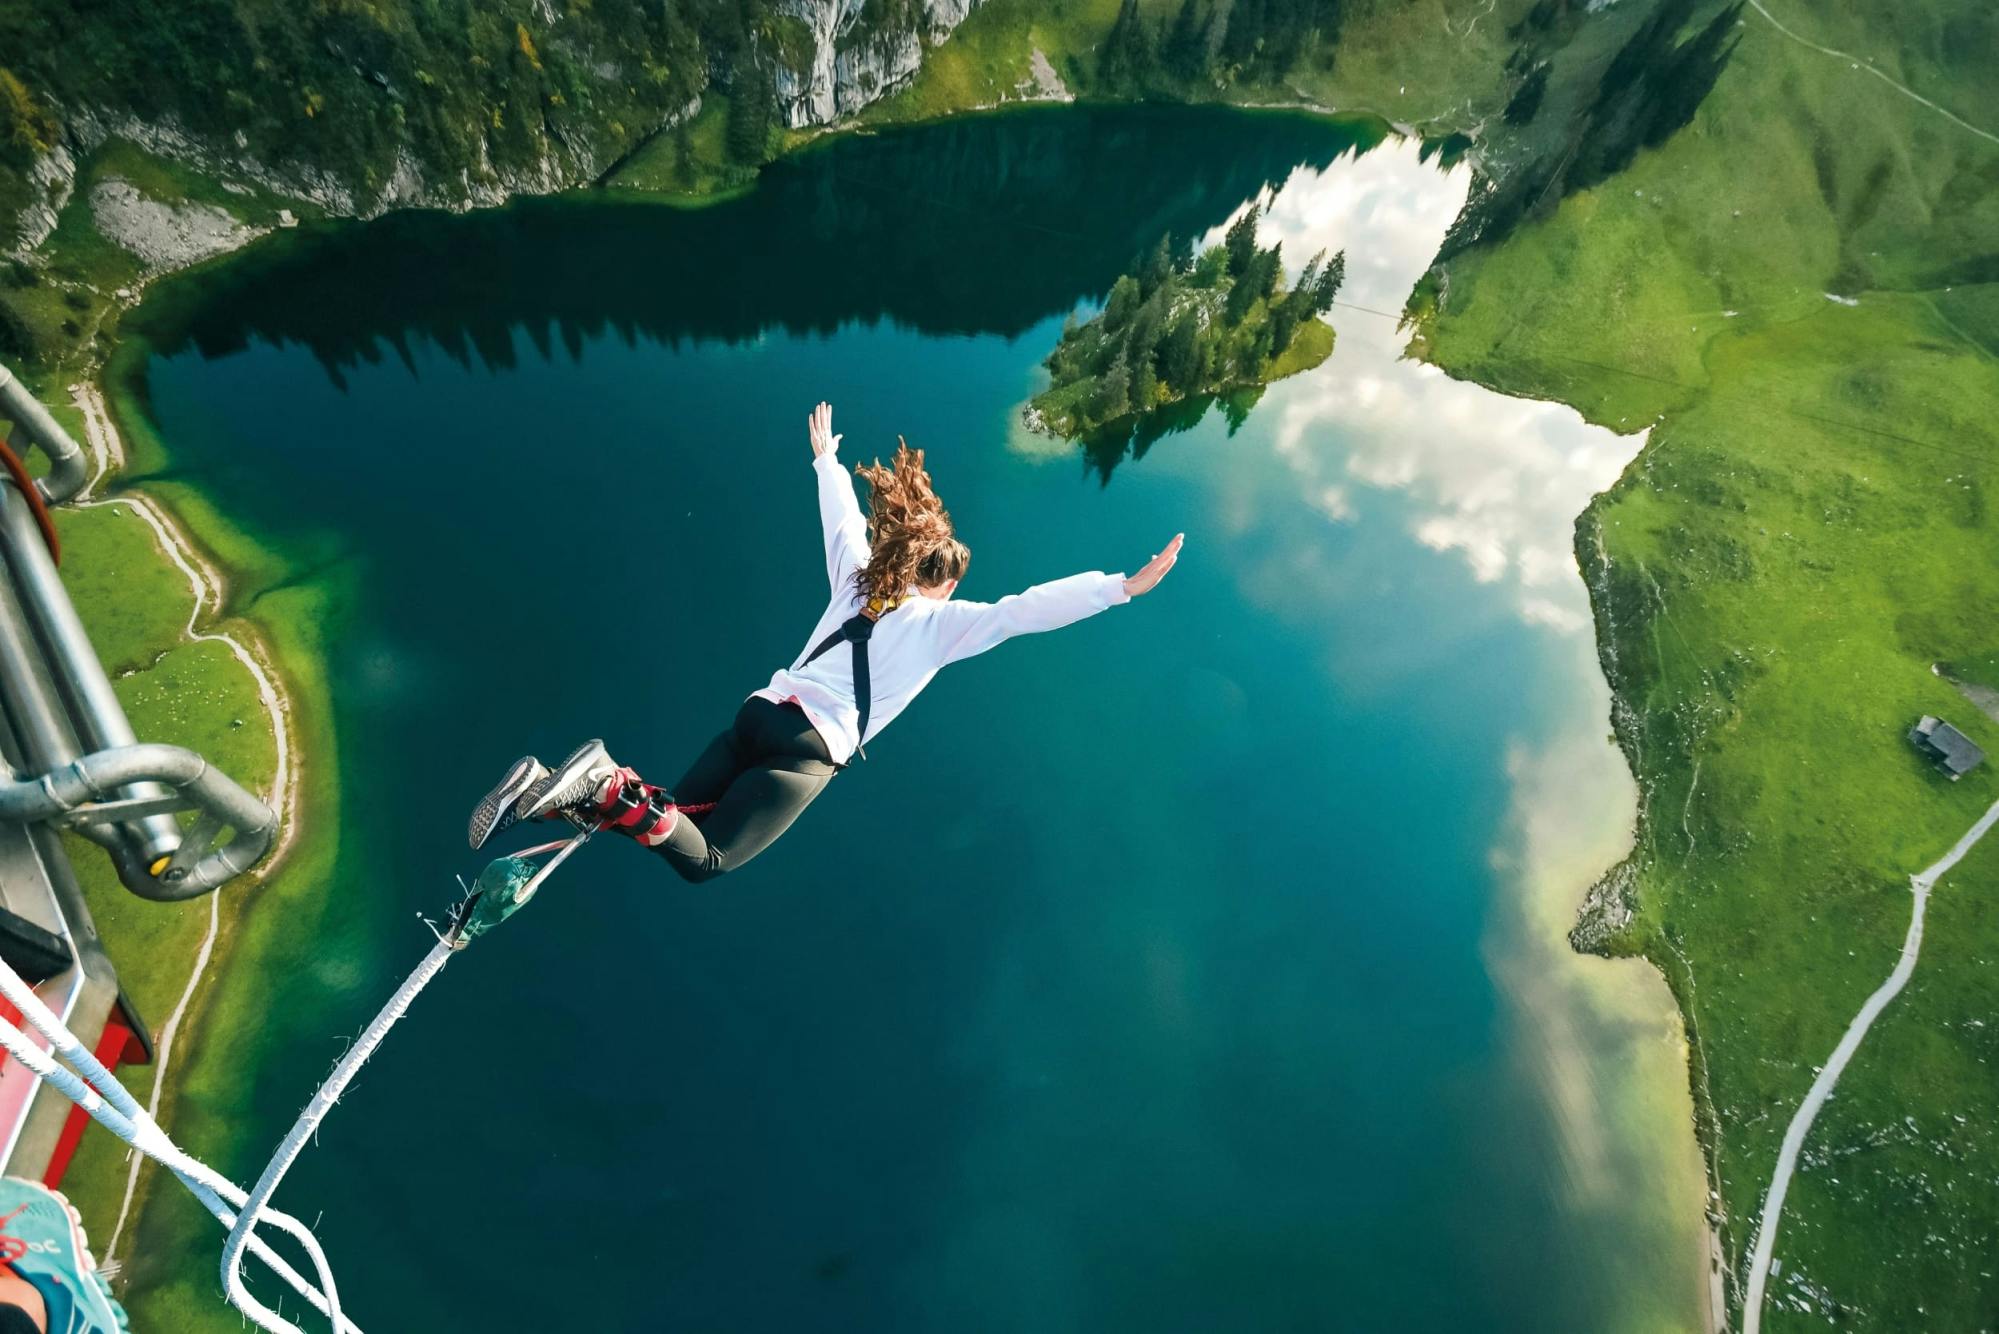 Bungy Jumping Experience on the Stockhorn in Switzerland